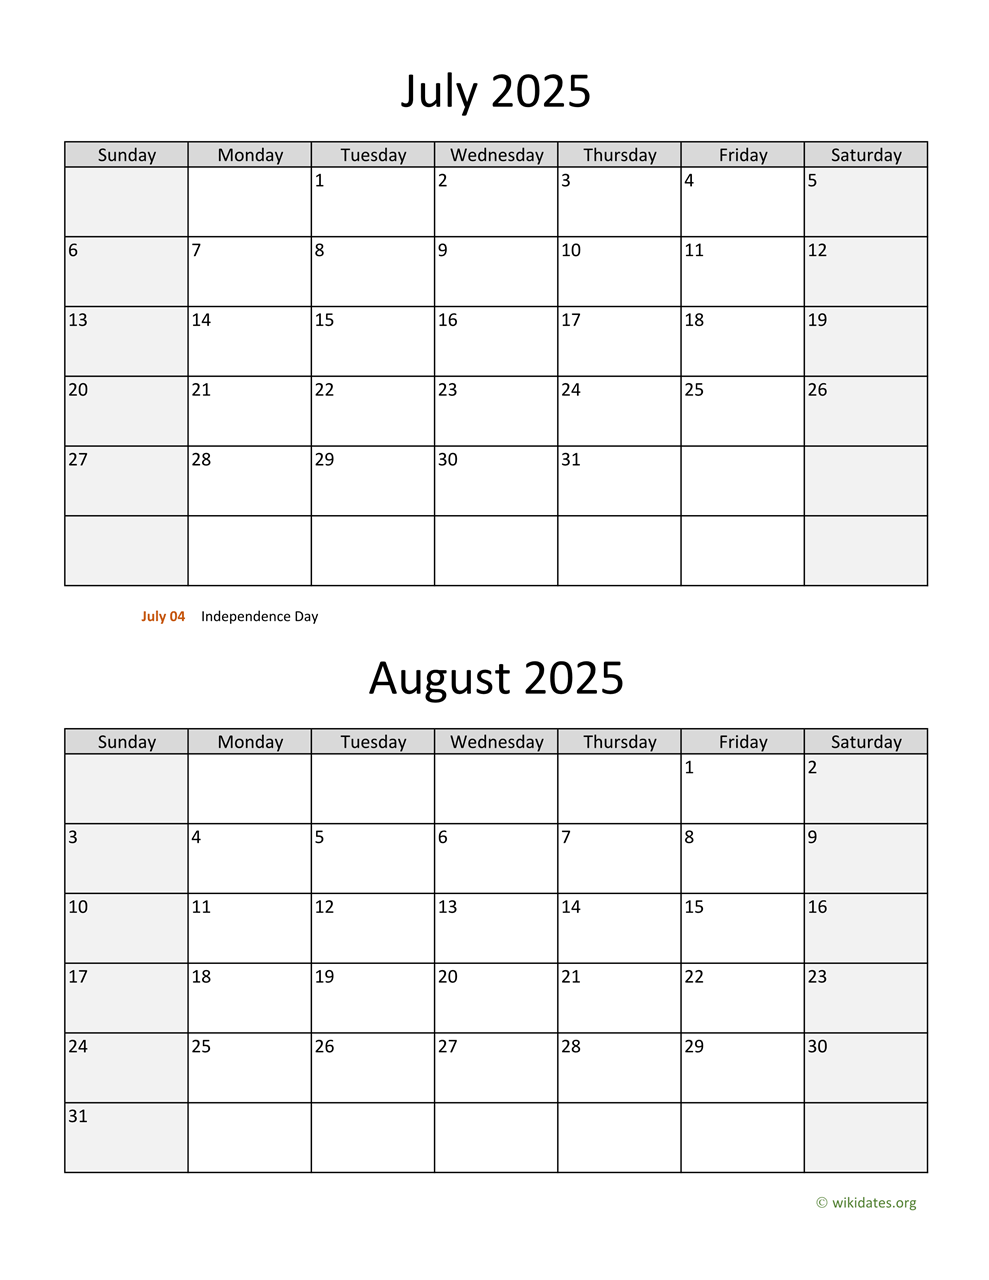 July And August 2025 Calendar WikiDates